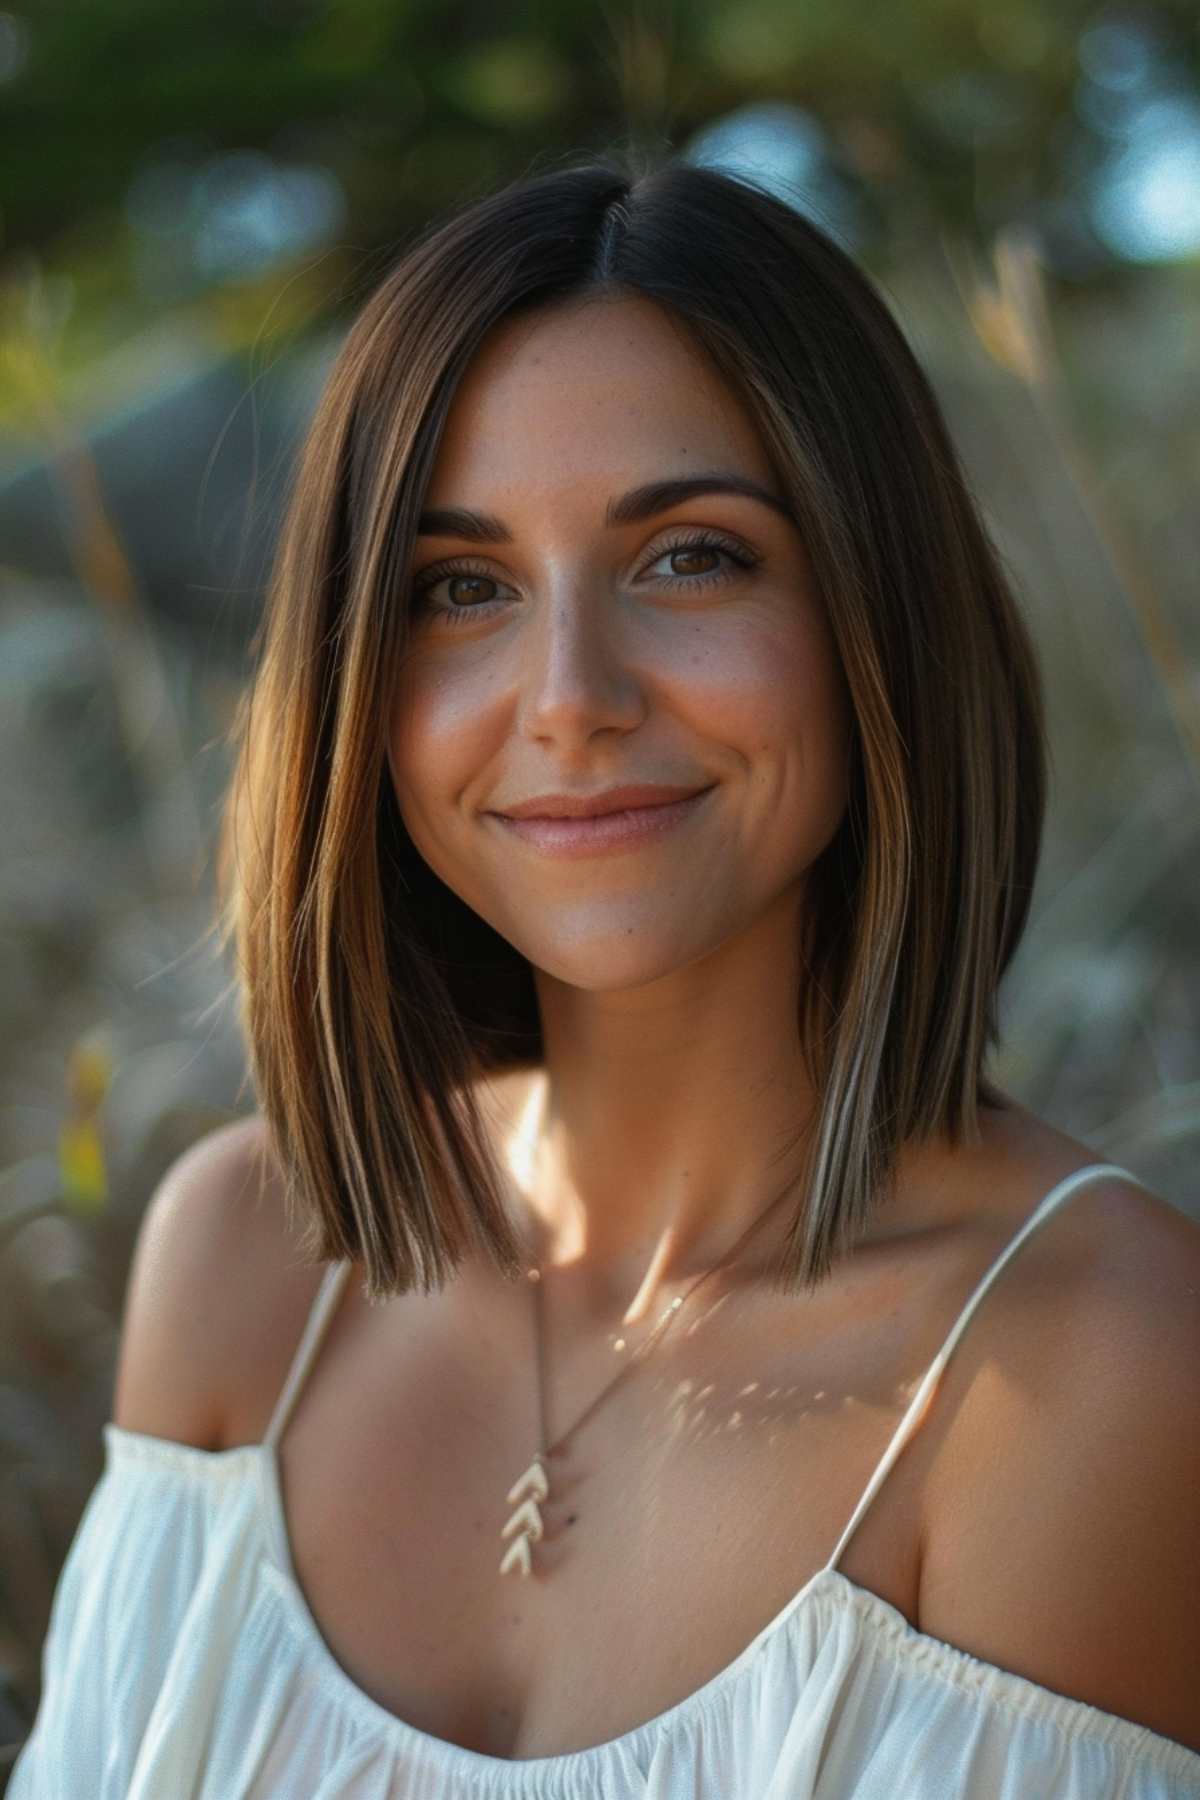 Woman with sleek bob hairstyle for hot weather